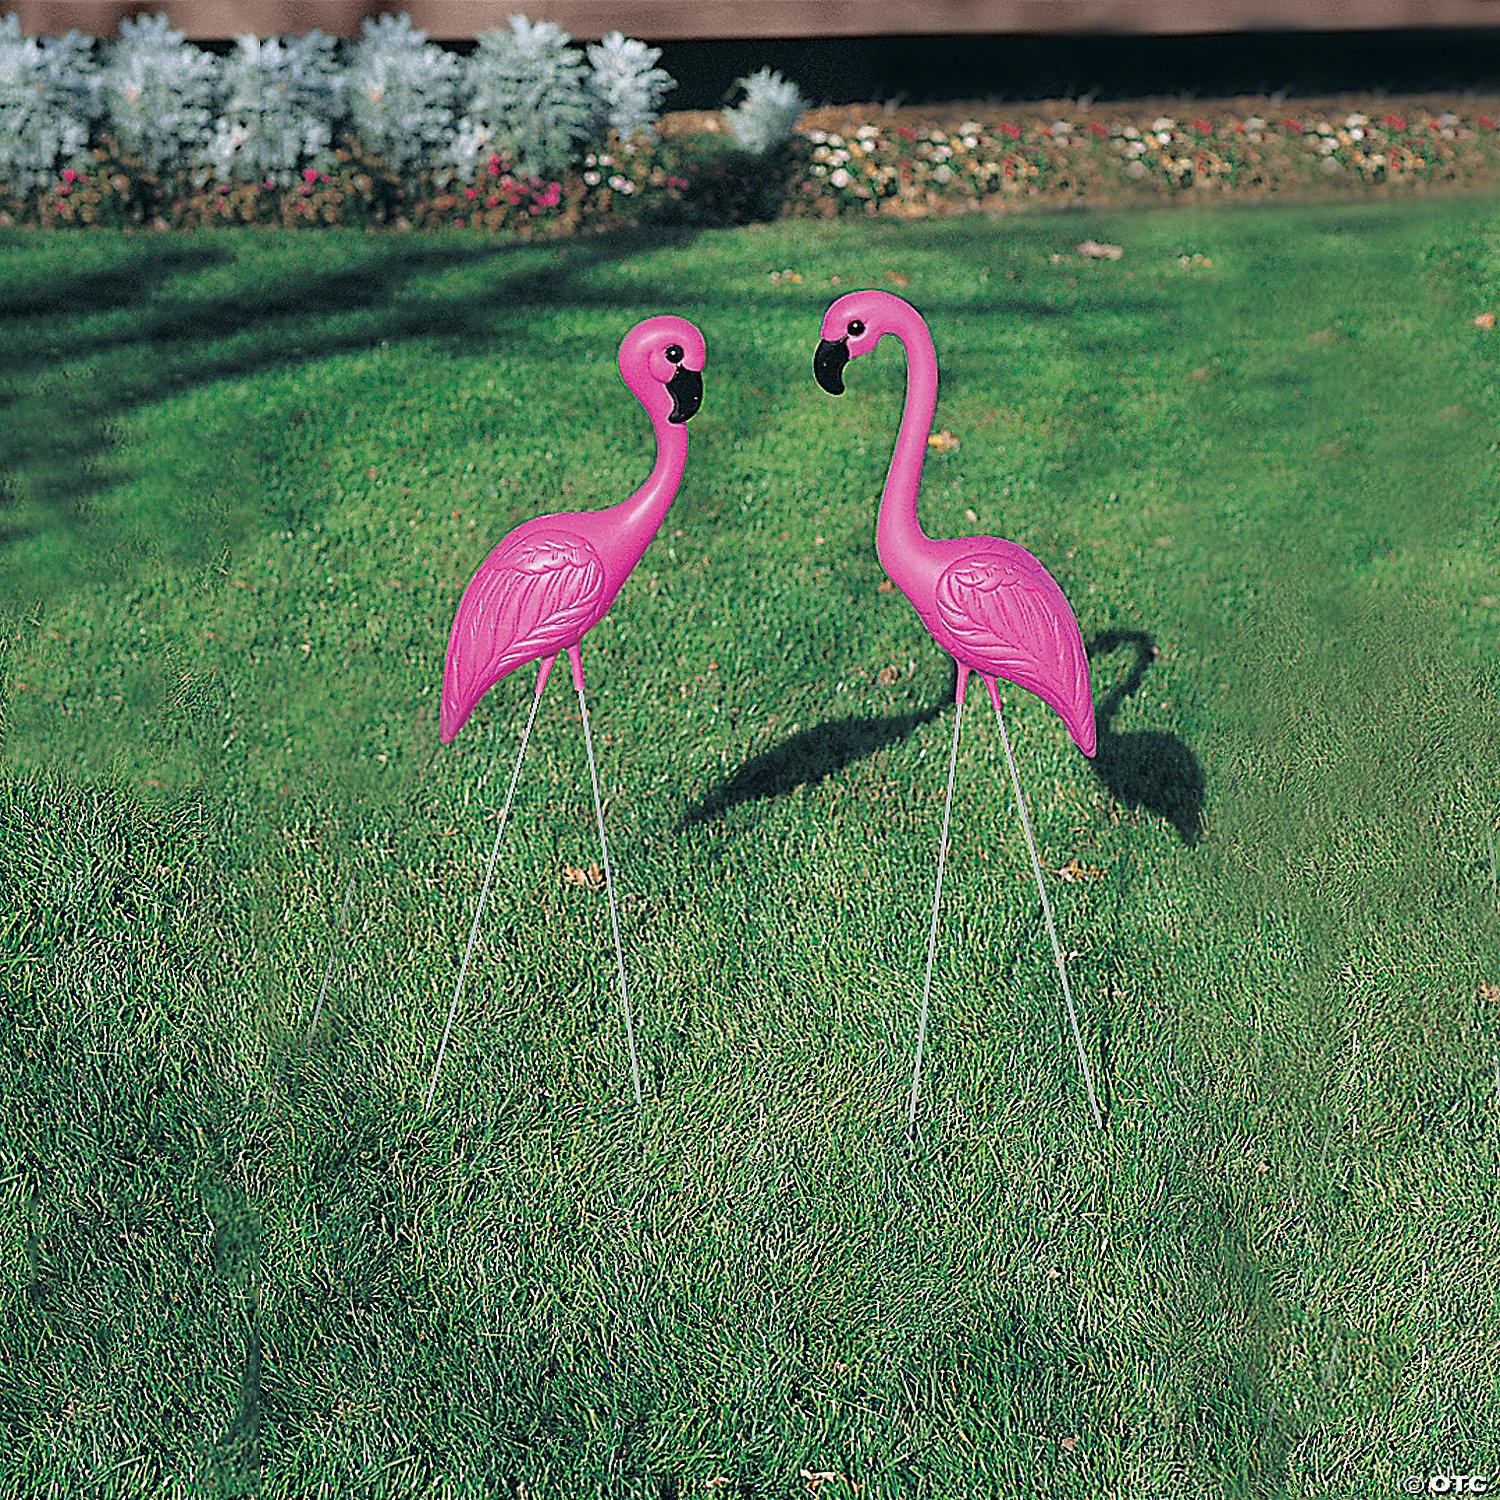 RM3262 pack of 2 34" pink FLAMINGO Yard Ornaments LARGE SIZE Tropical decor 